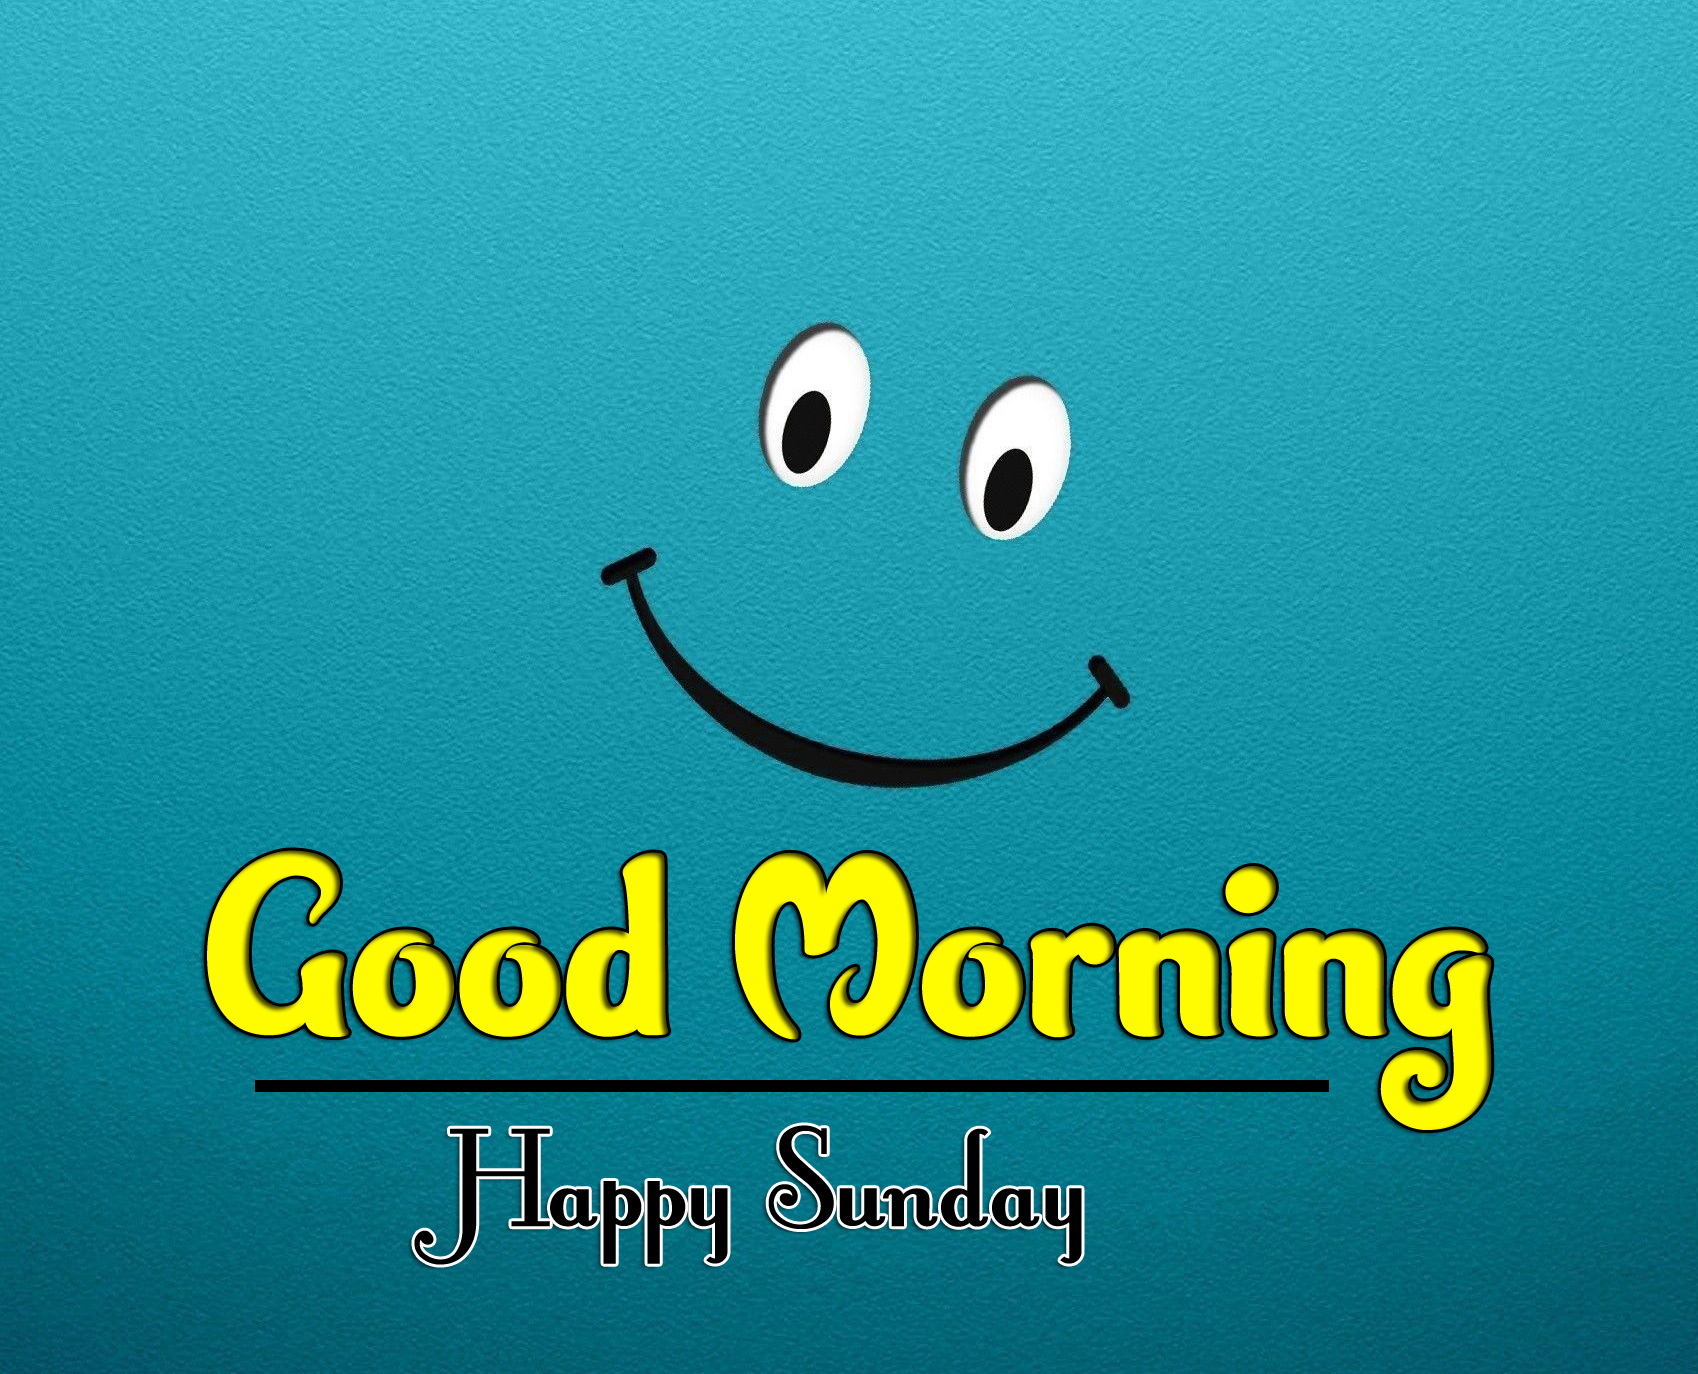 Sunday Good Morning Wishes Pics for Facebook 